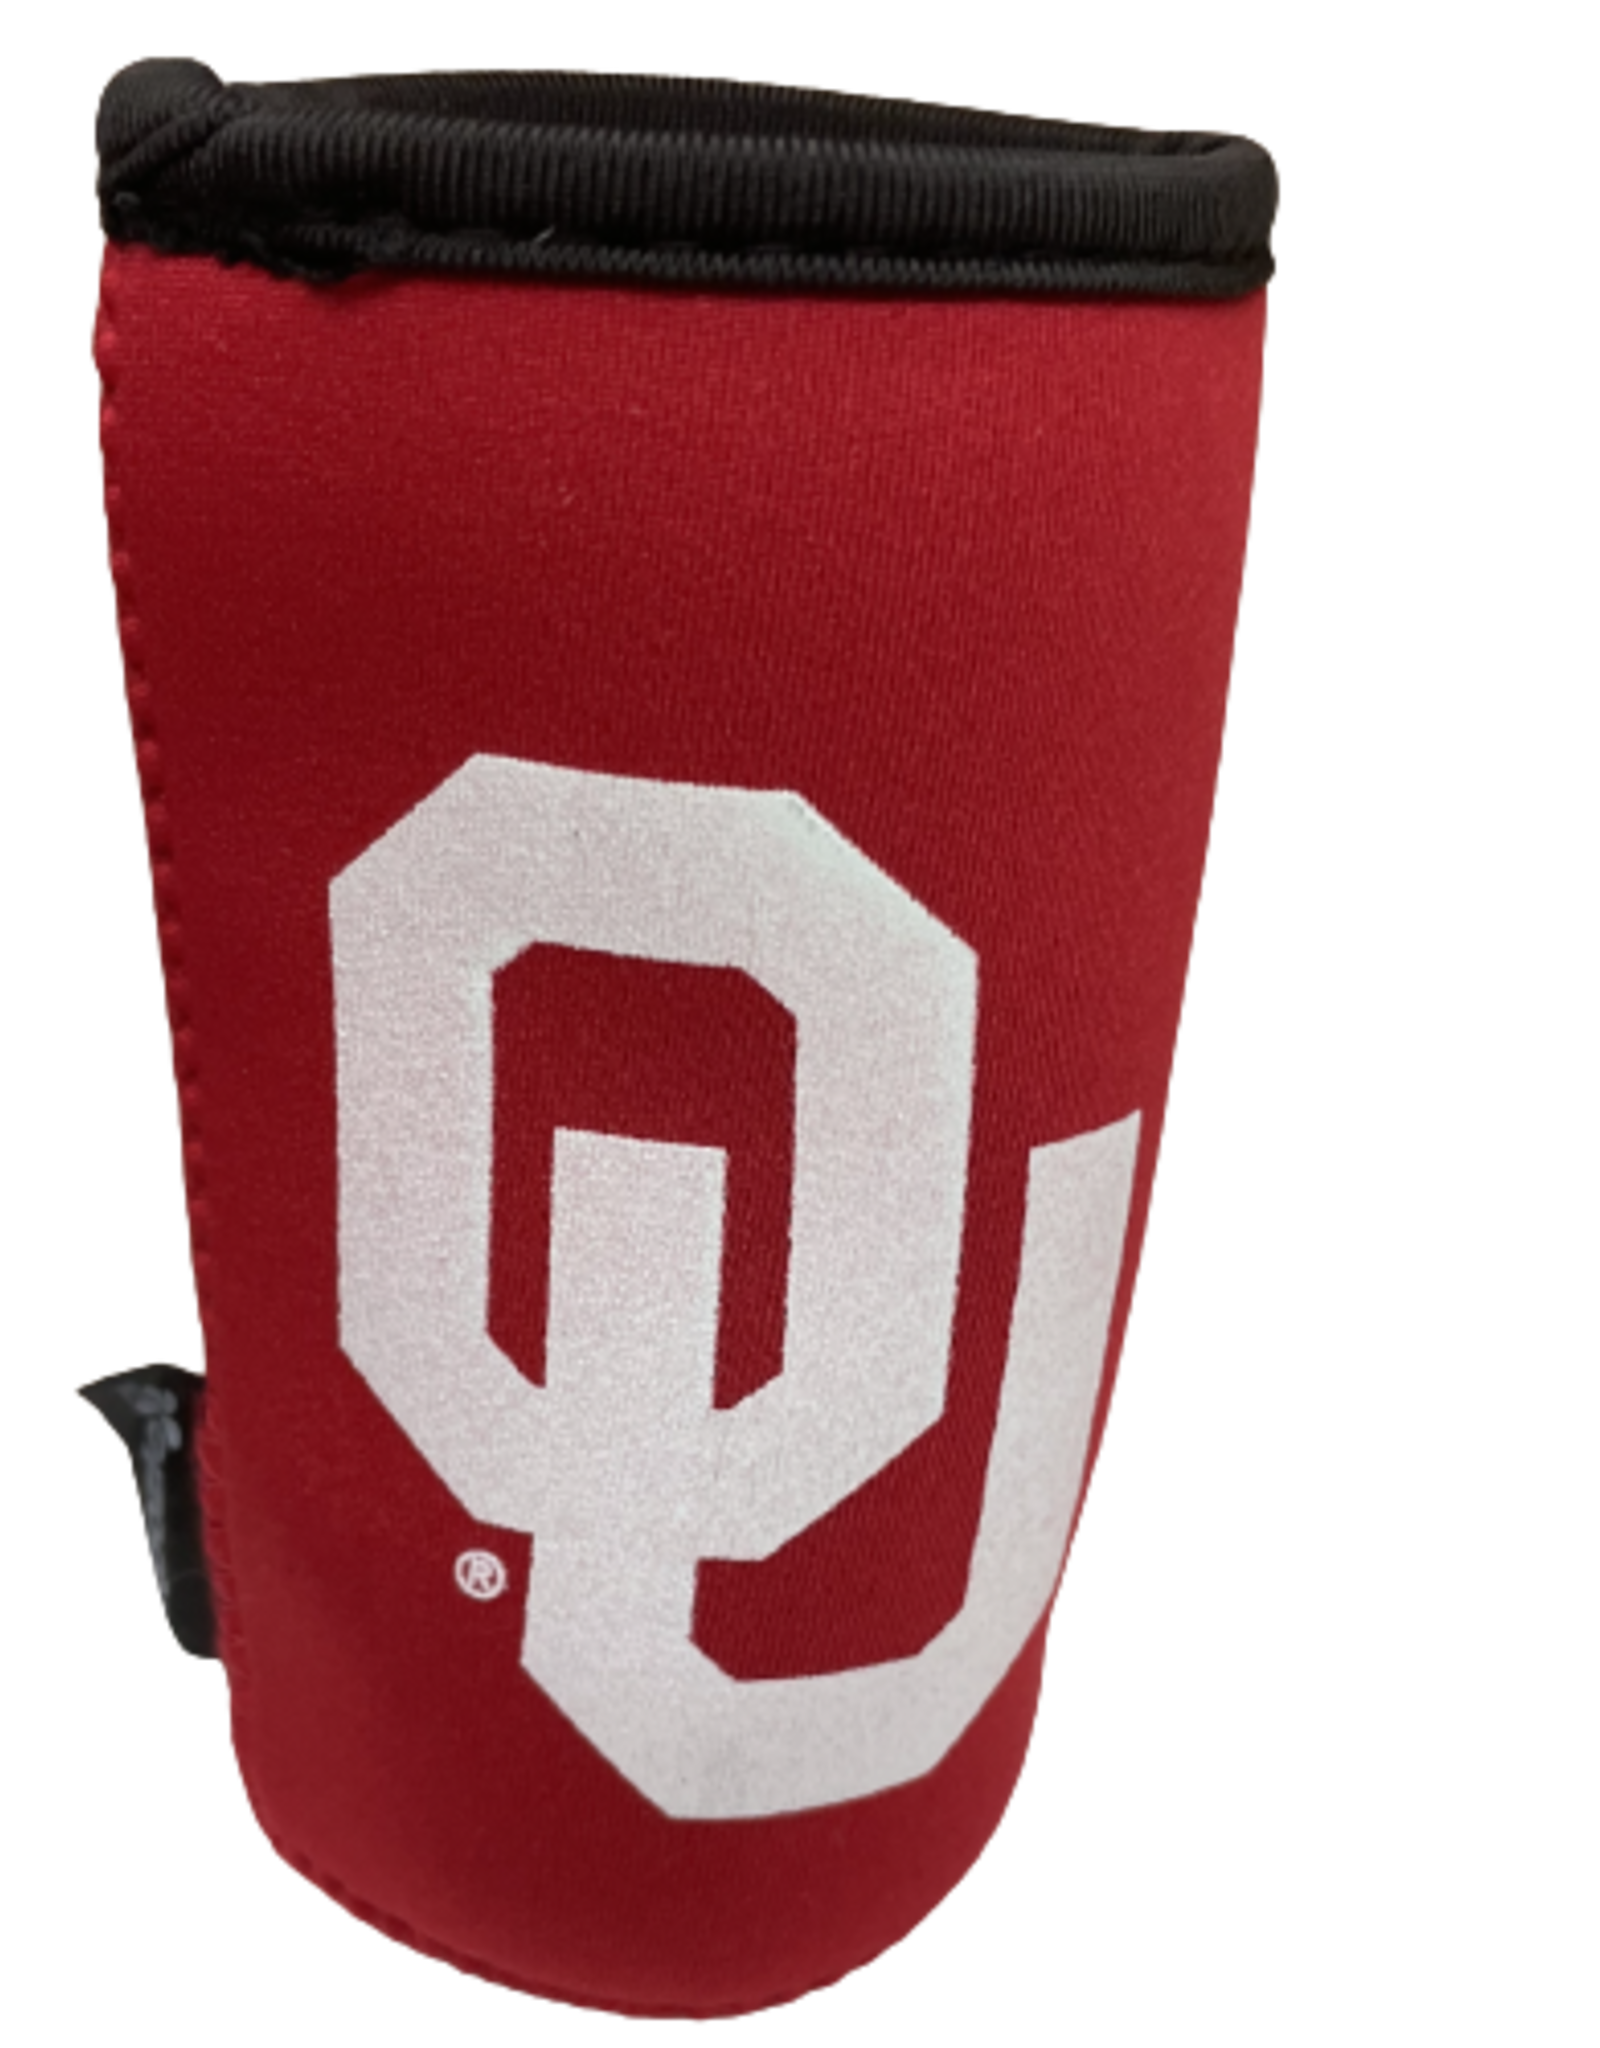 Koozie OU Slim Can Holder with sewn bottom